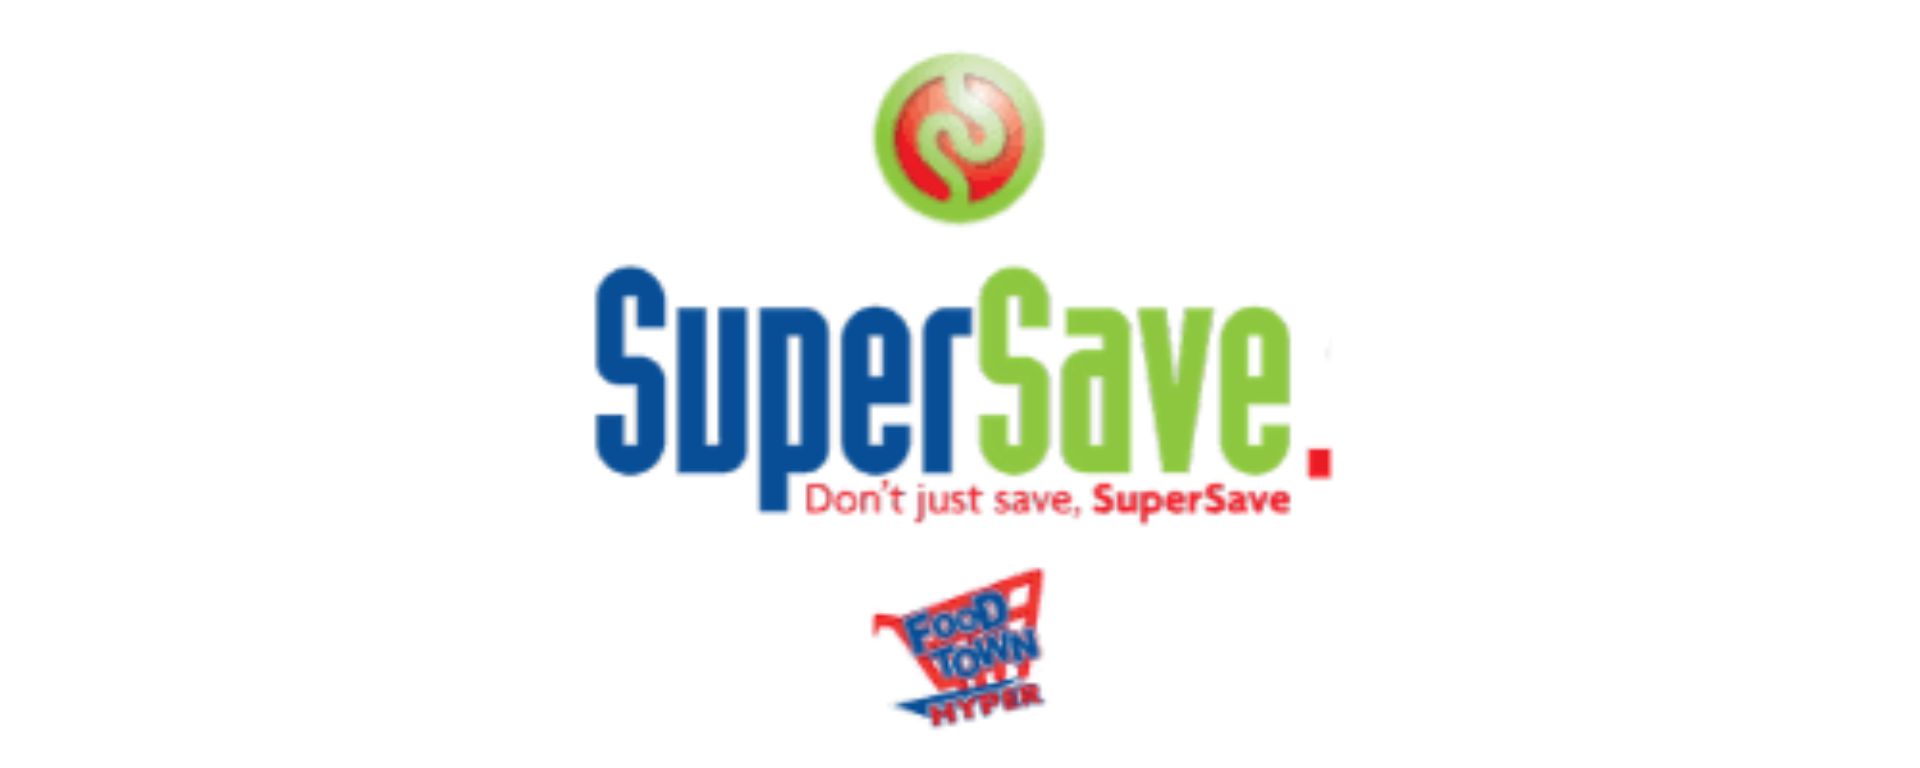 SuperSave